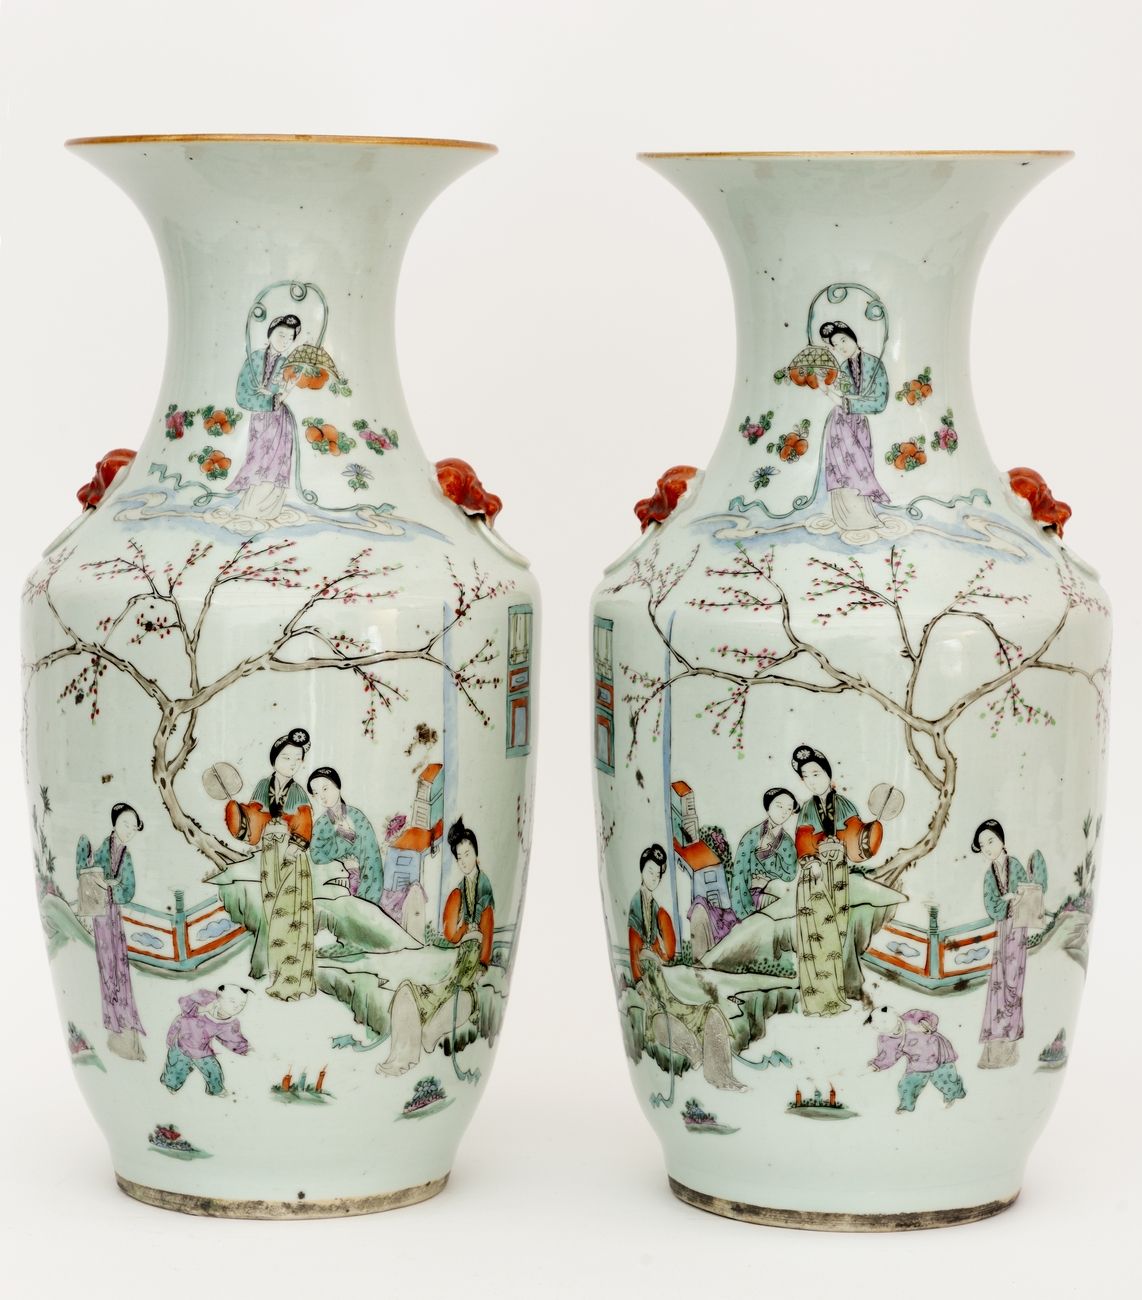 Null China, XIX-XXth century
Pair of porcelain vases with polychrome enamel deco&hellip;